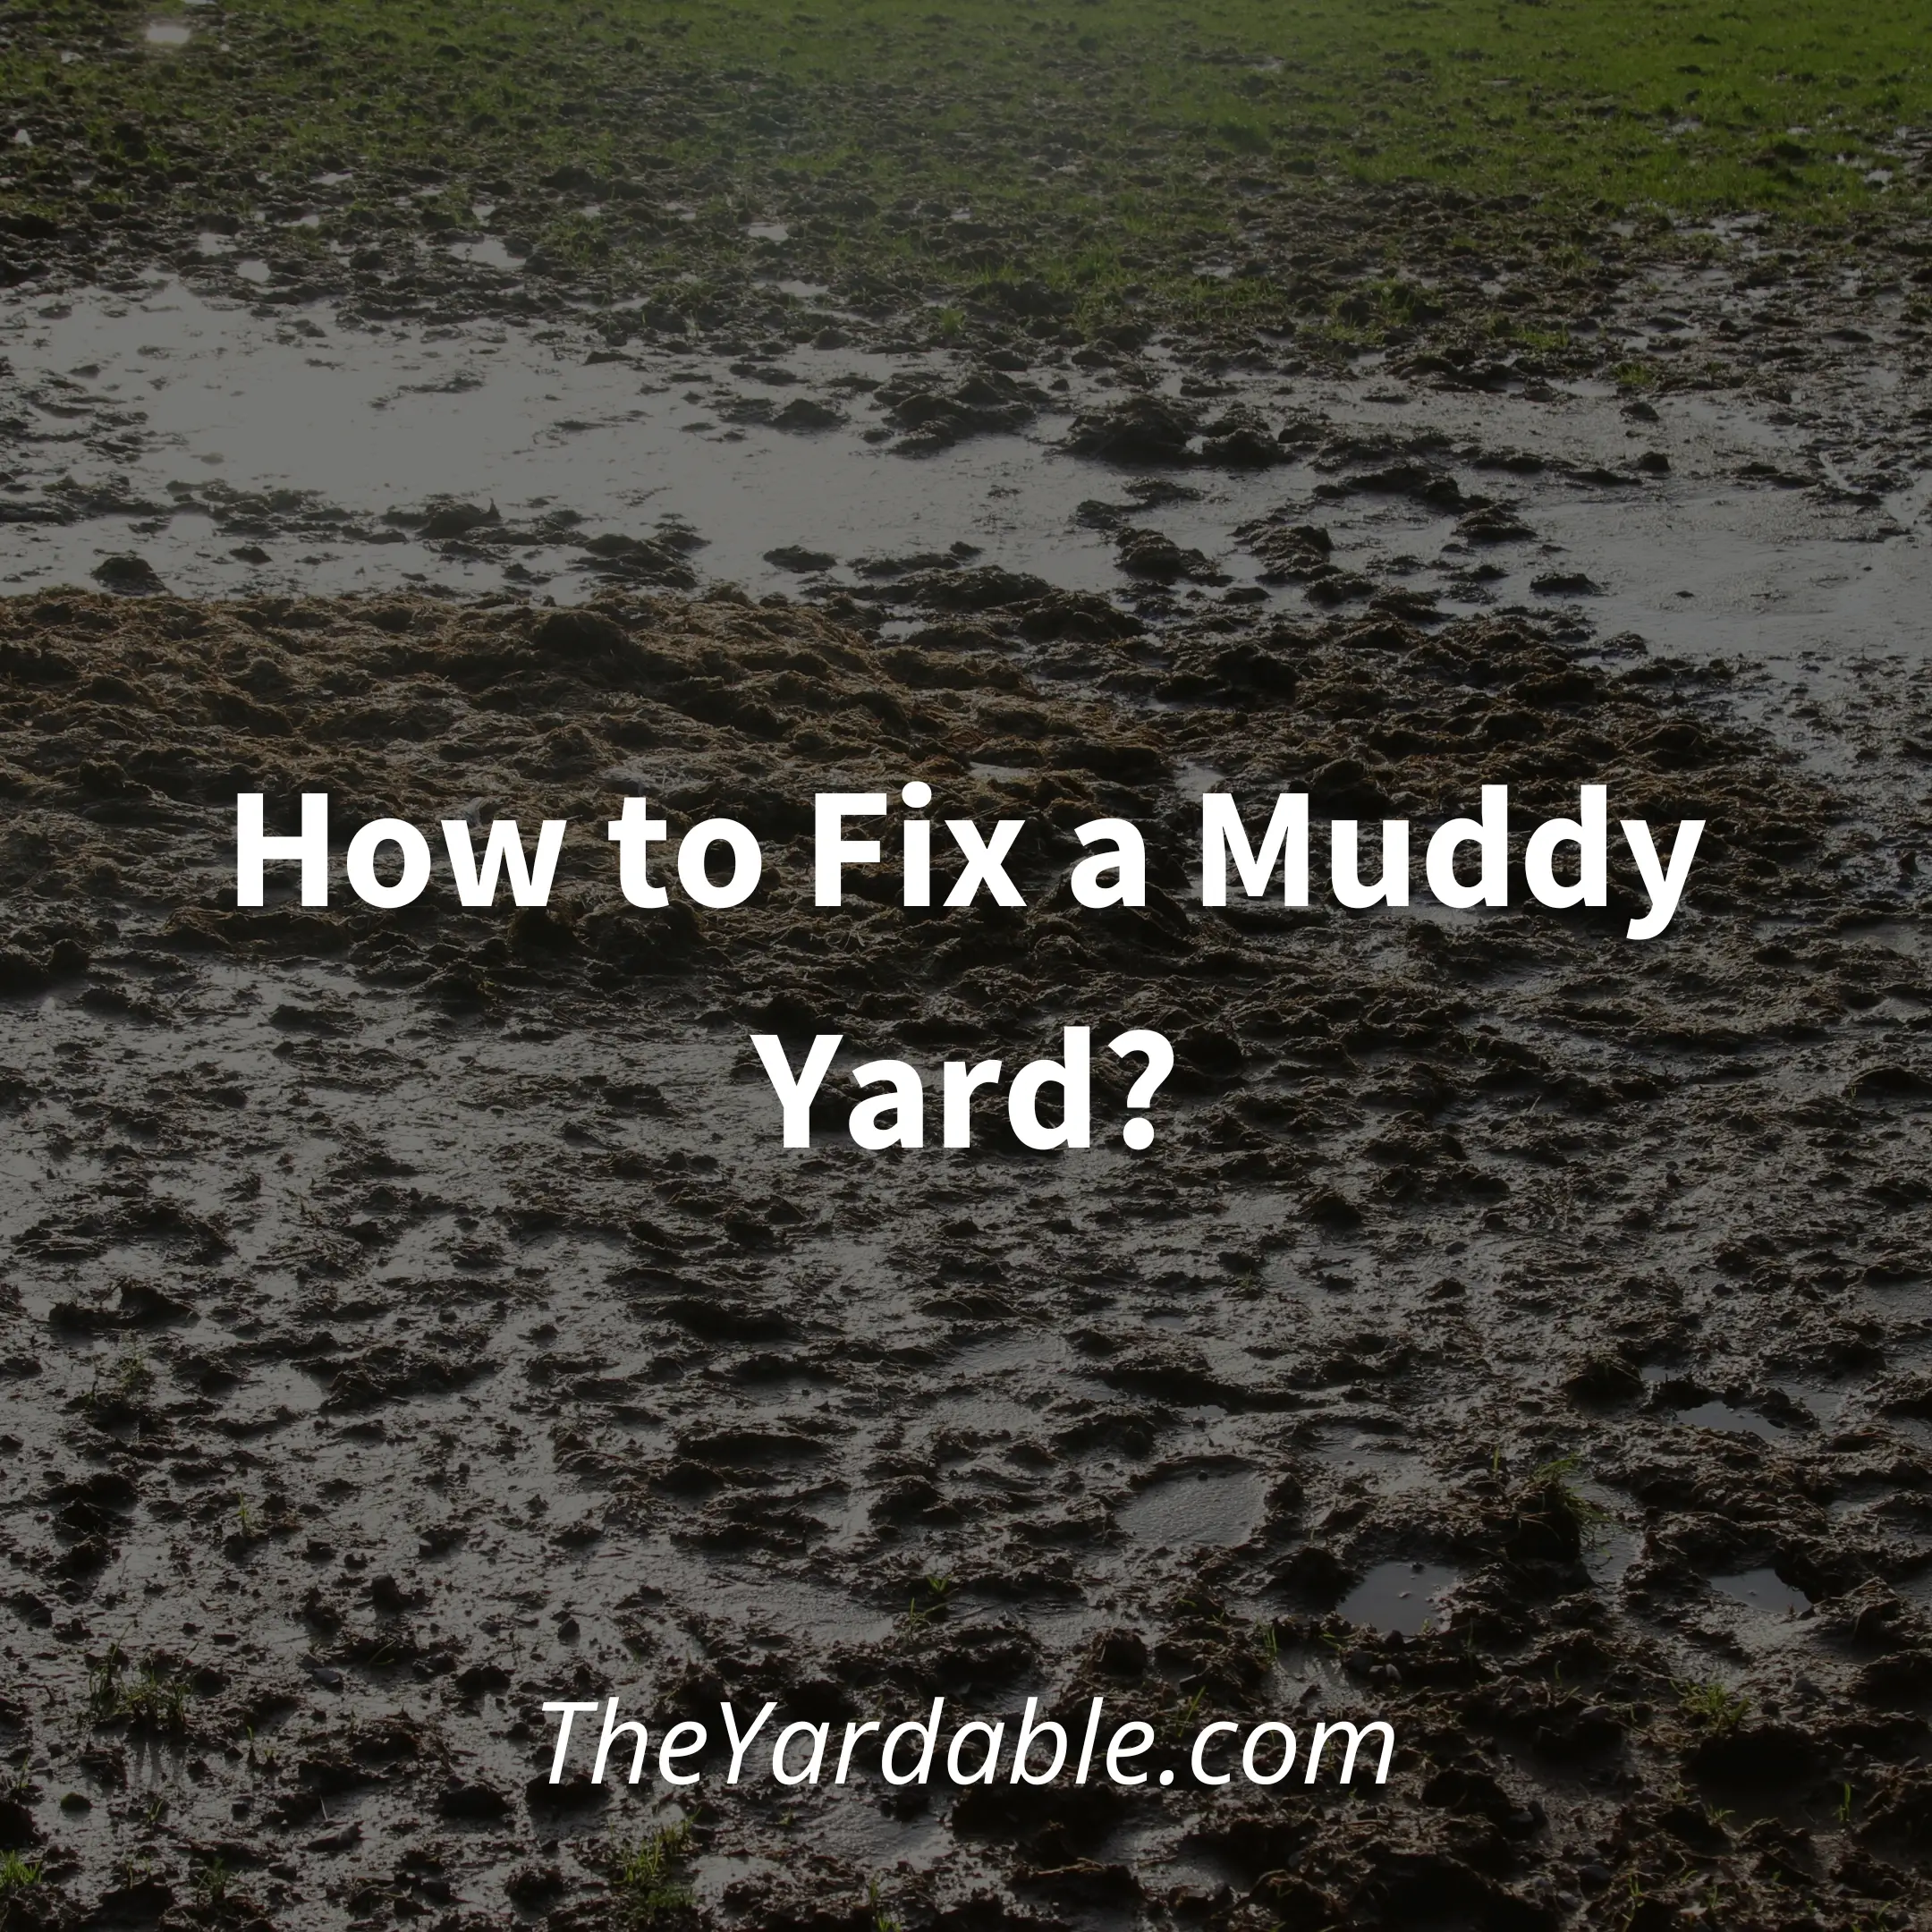 How To Fix A Muddy Yard?